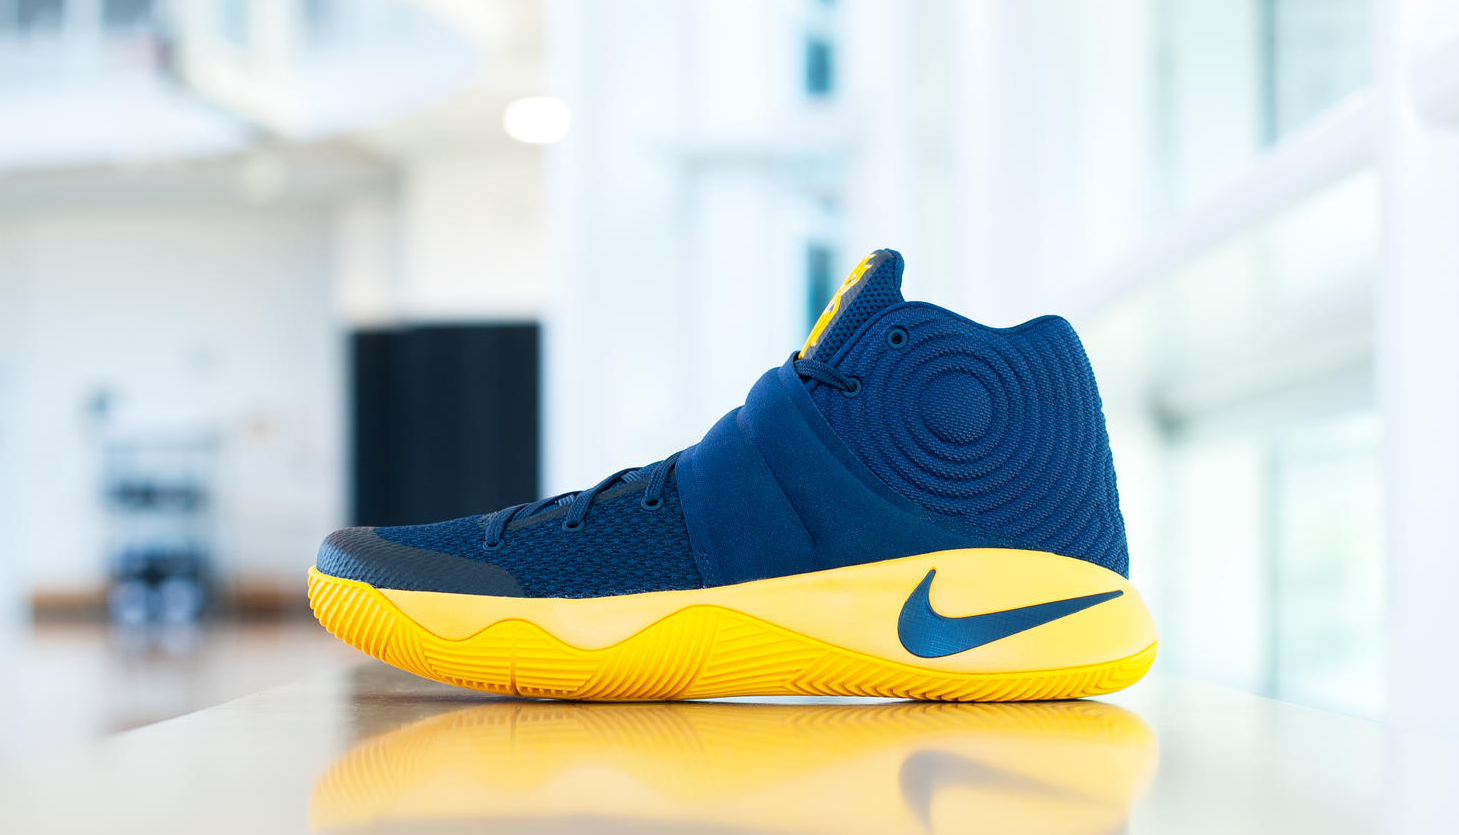 kyrie new shoes 2016